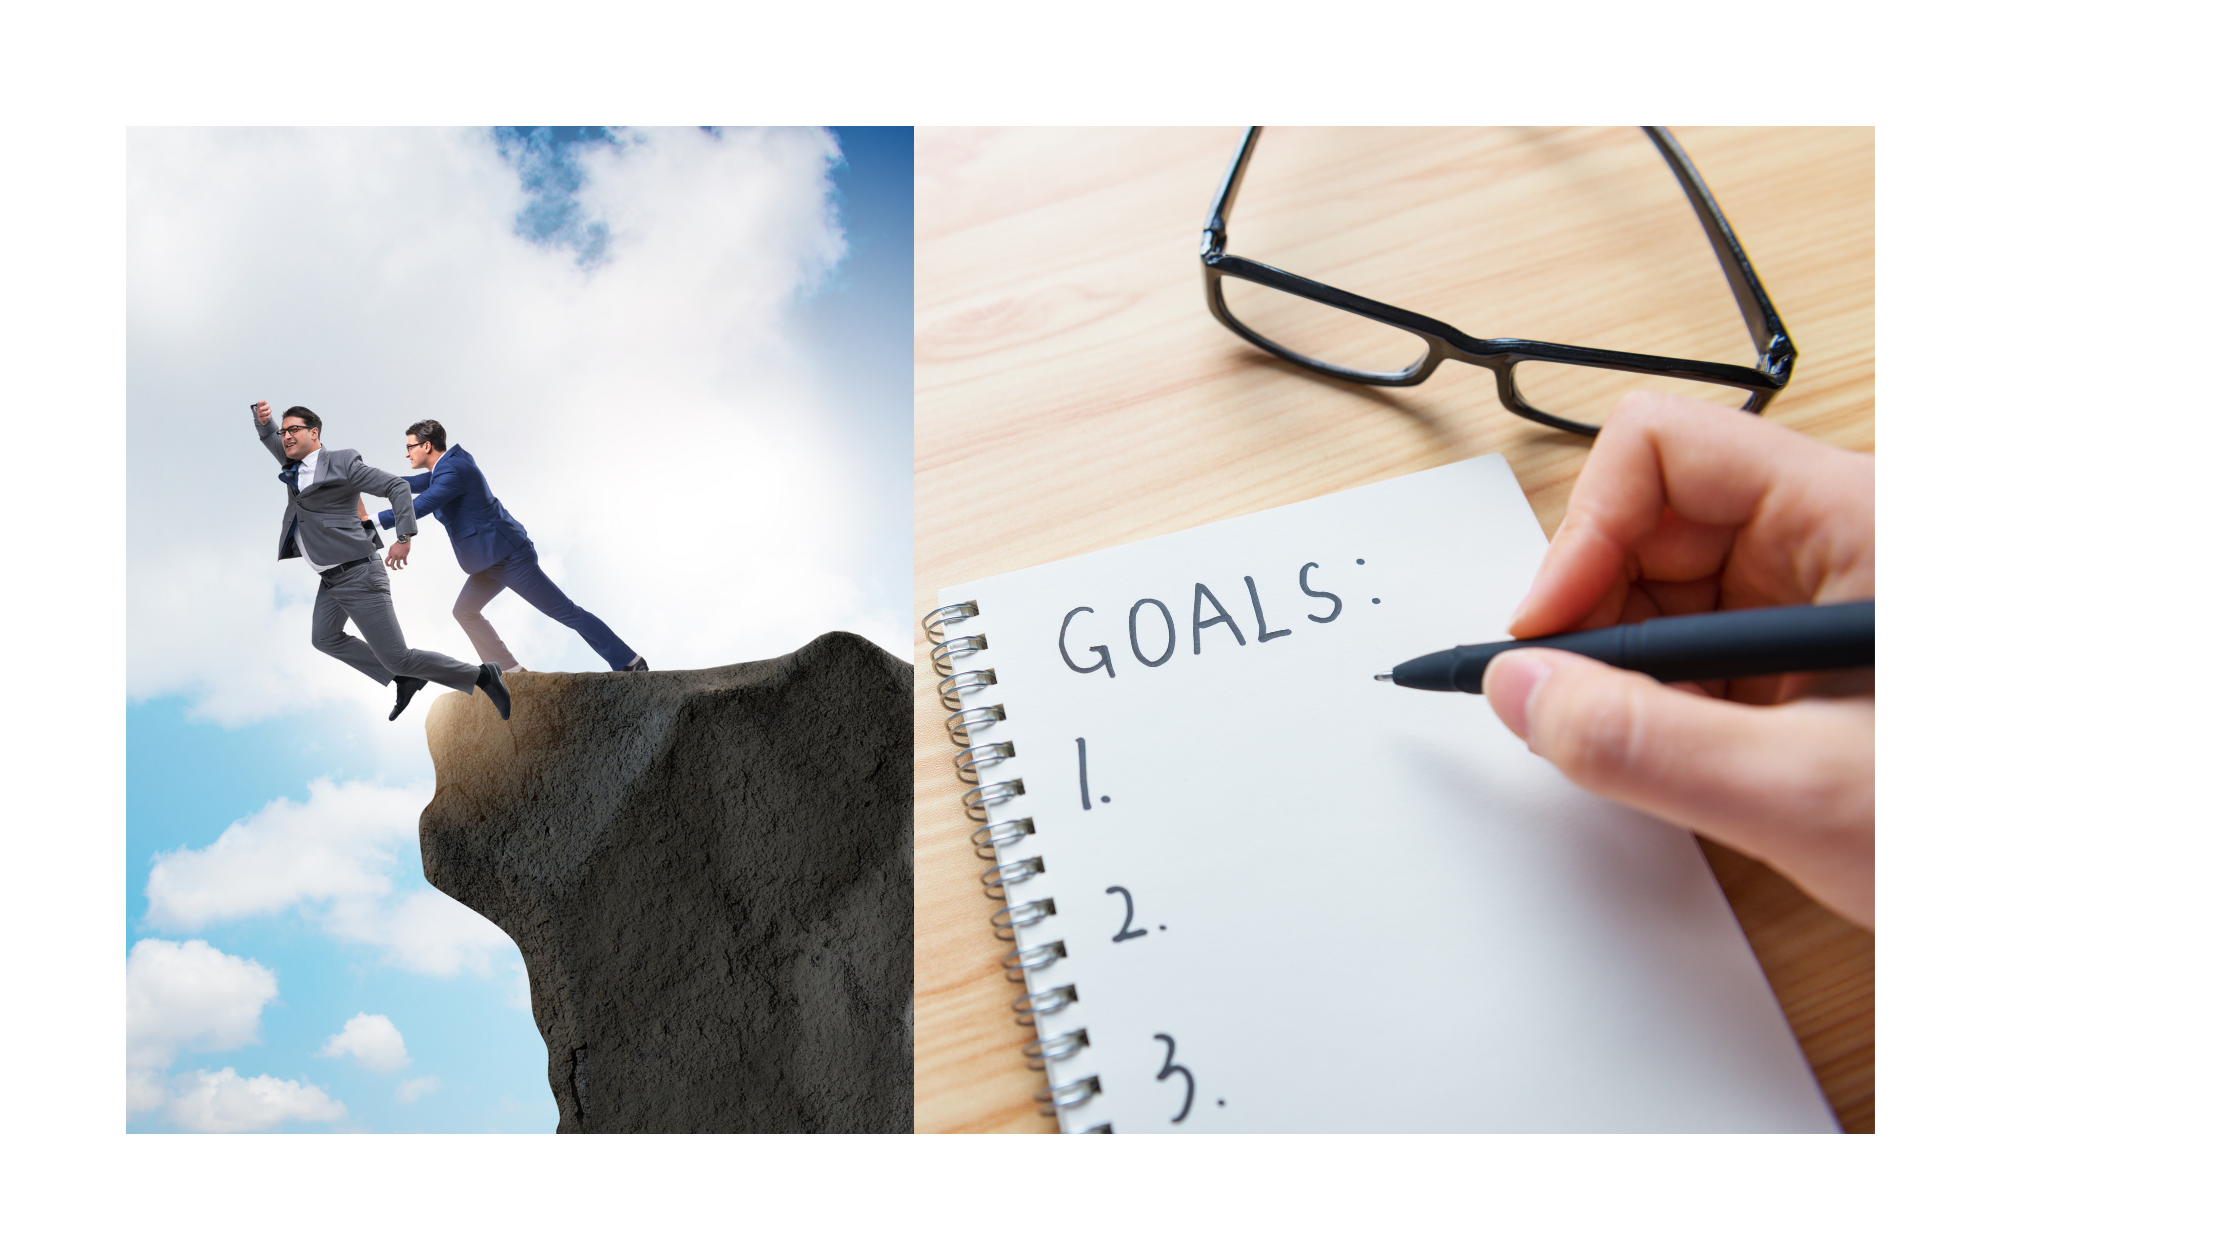 Unethical goal setting